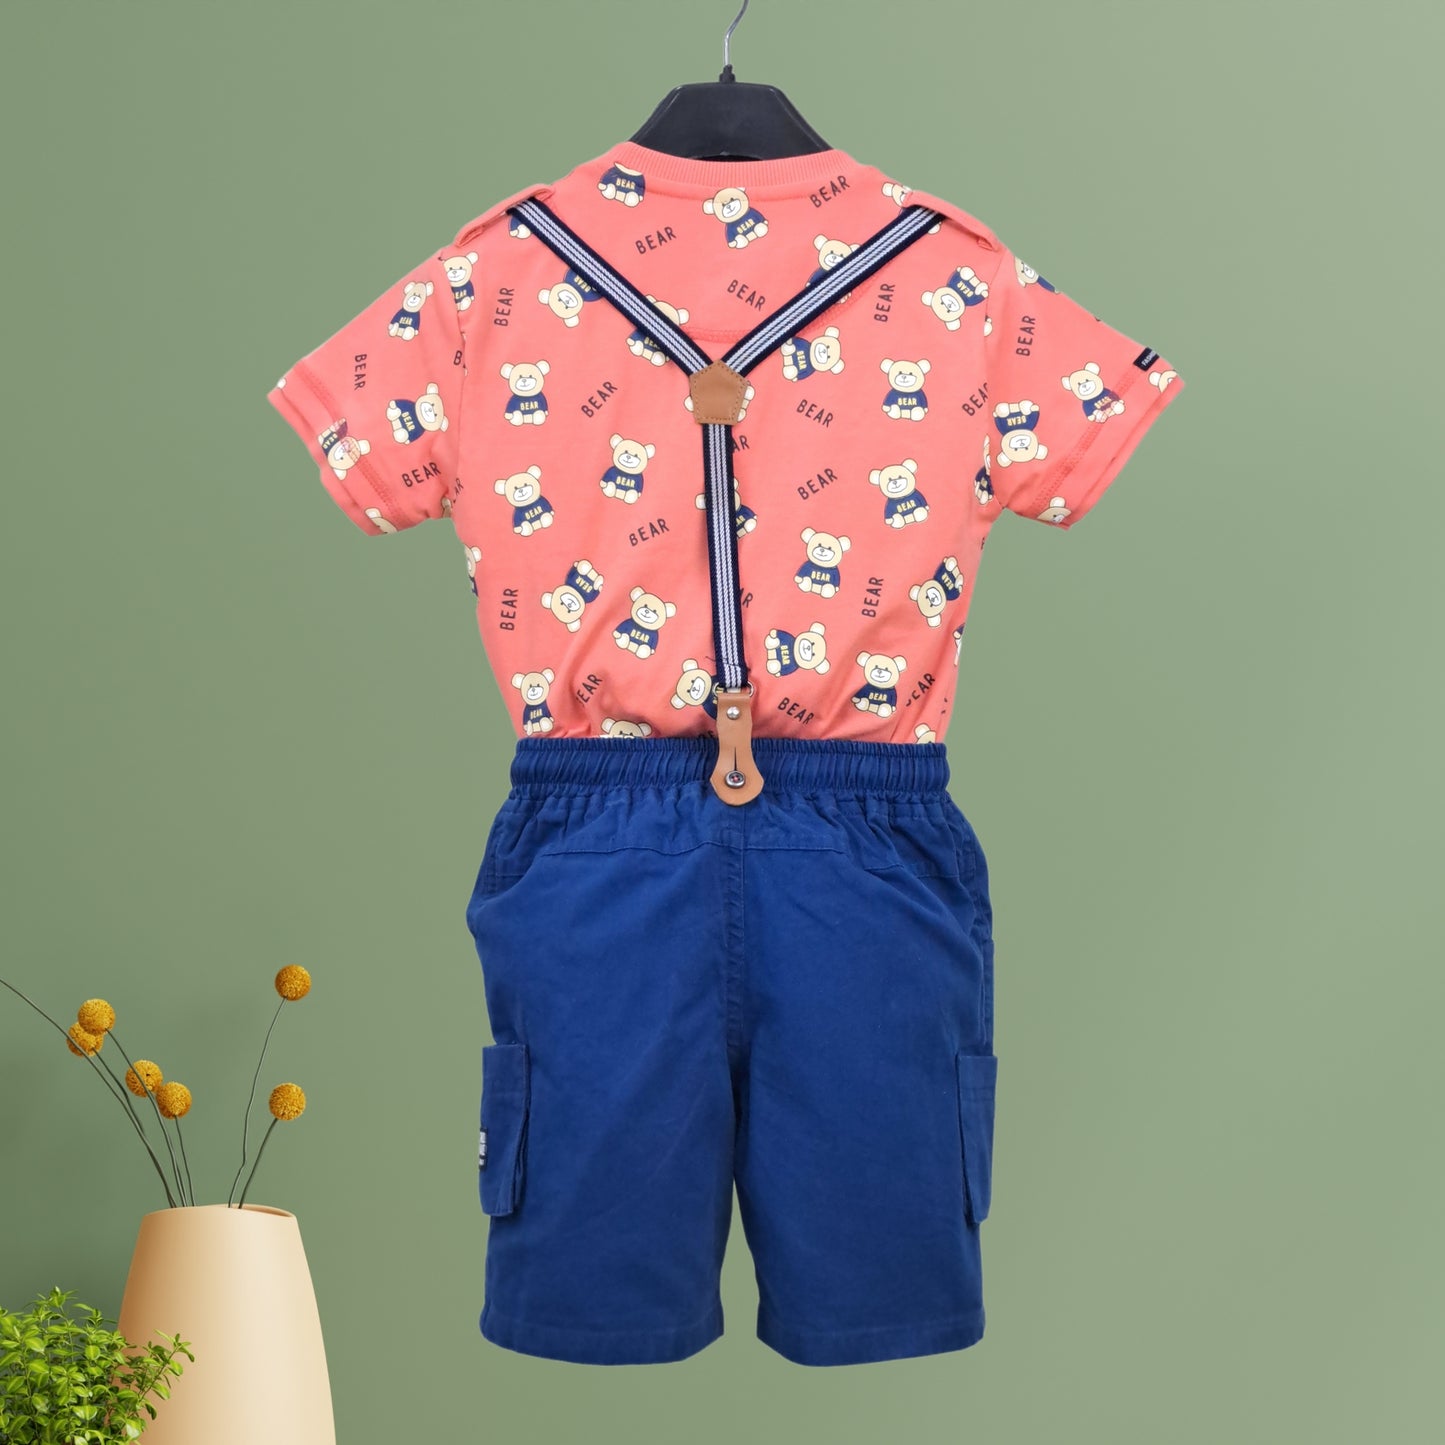 Cotton Knit Bear Print Half Sleeves T-Shirt and Shorts with Suspender